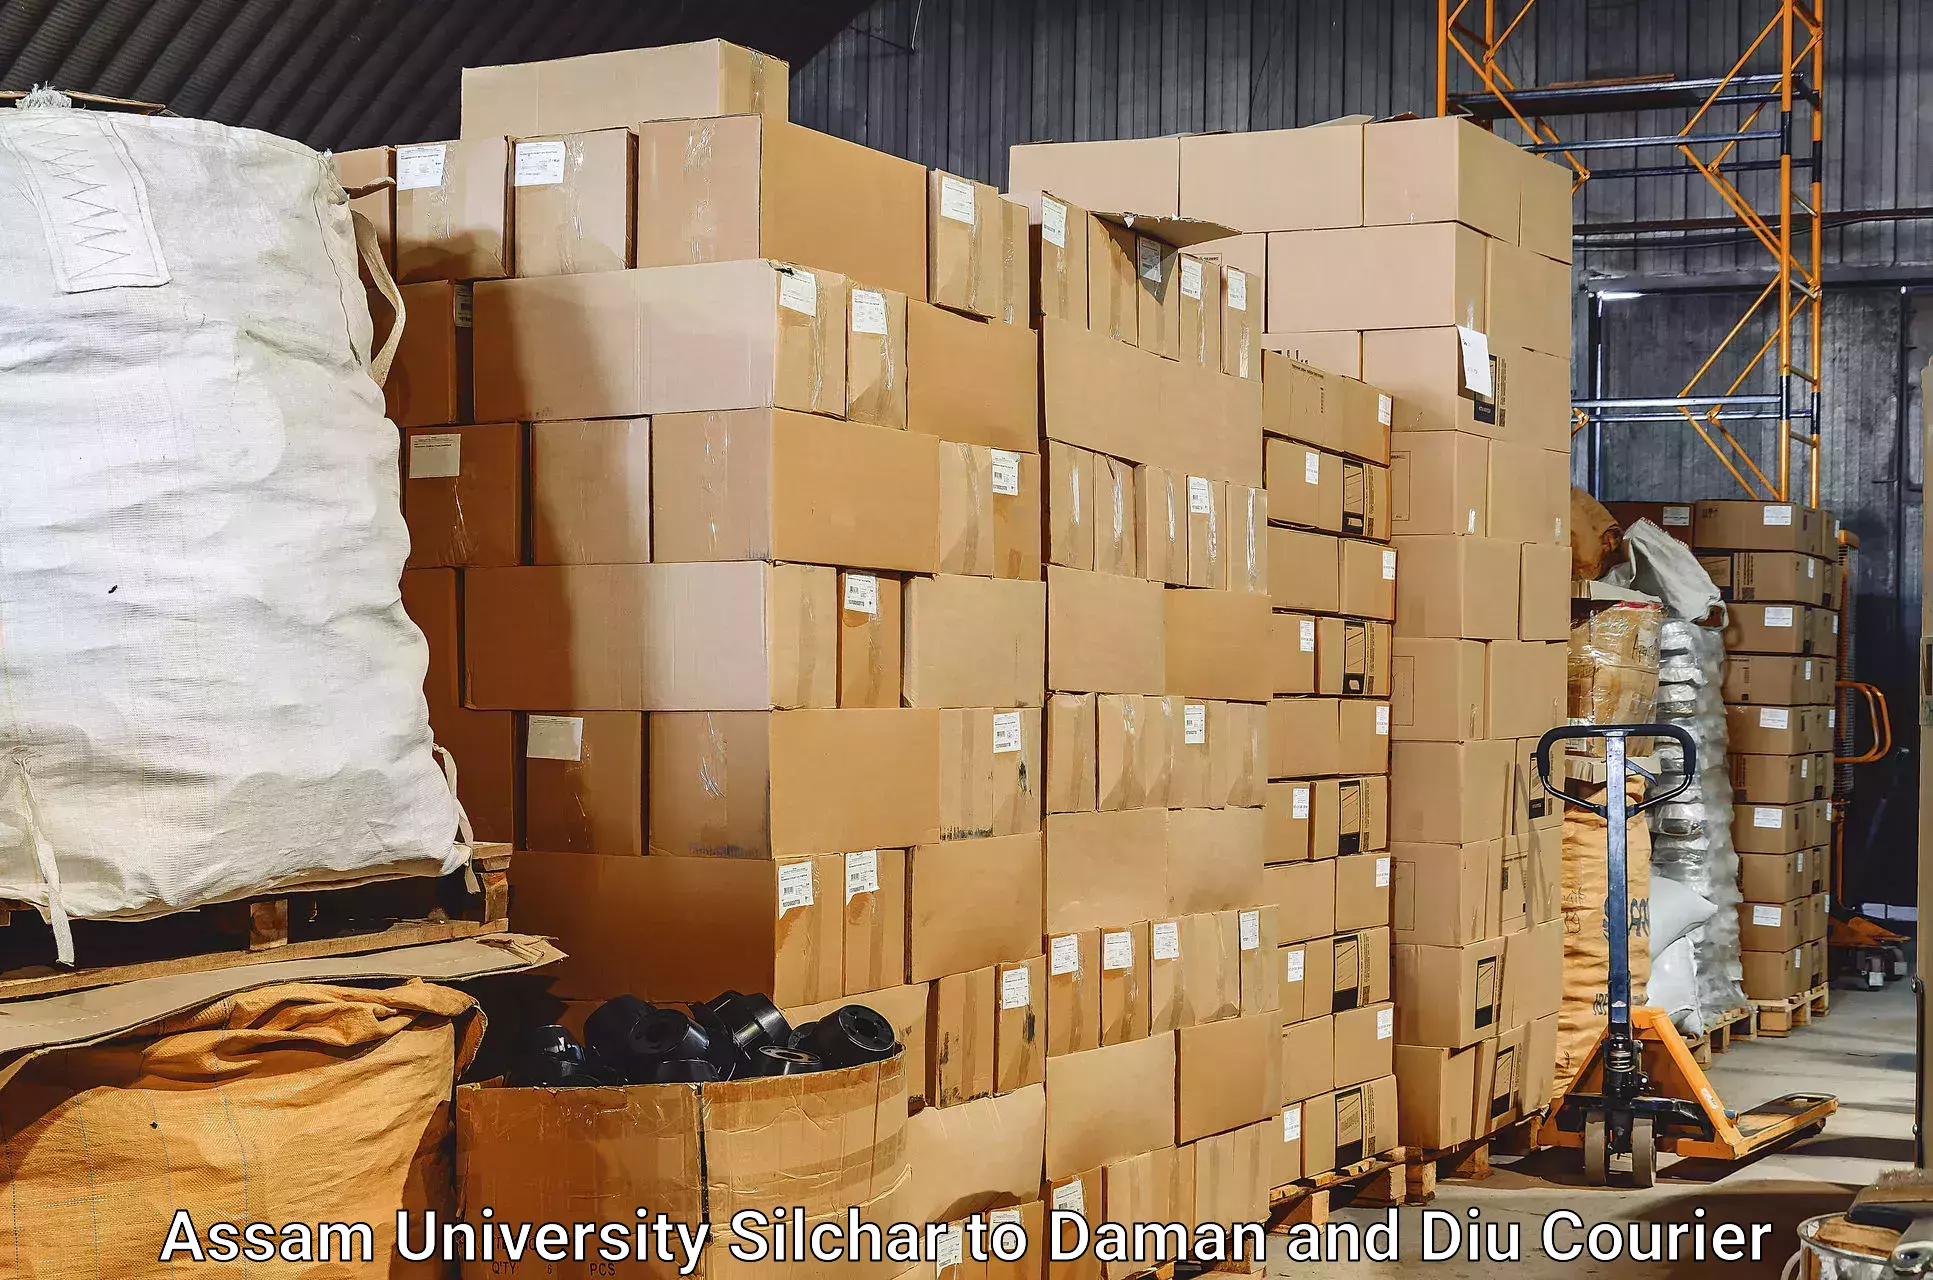 Luggage shipment specialists Assam University Silchar to Diu